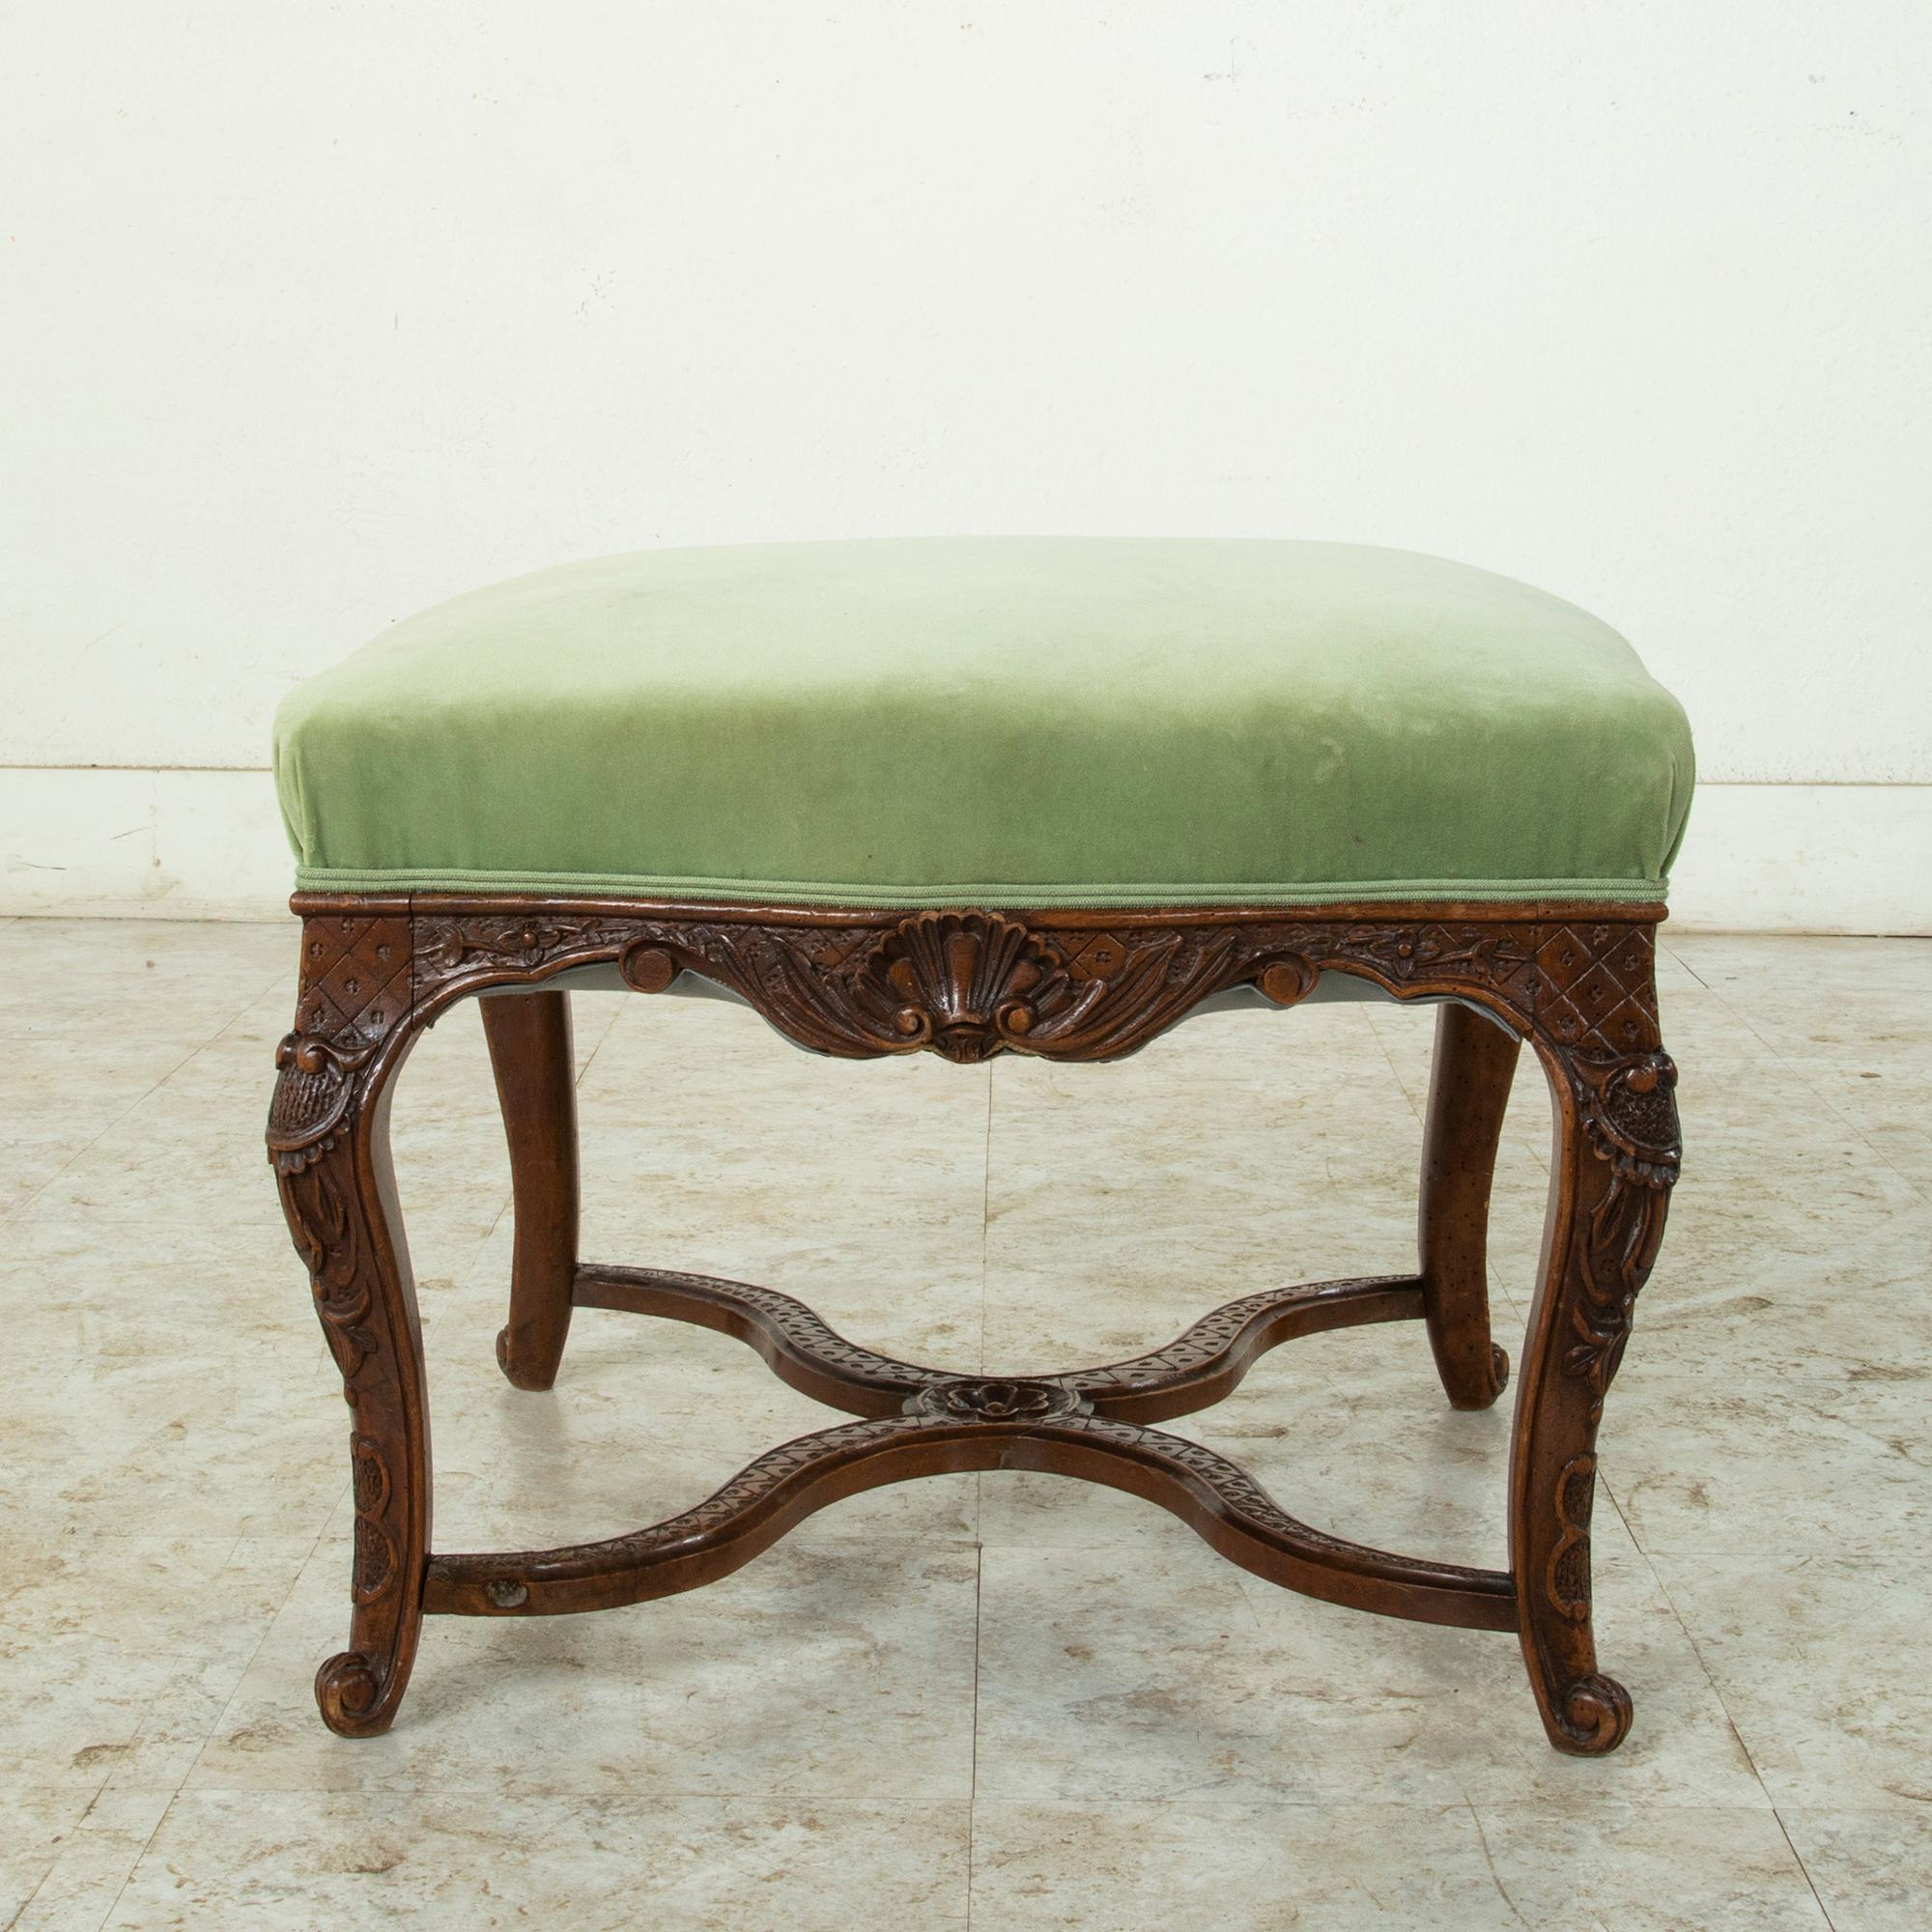 Upholstery Late 19th Century French Regency Style Hand Carved Oak Ottoman or Vanity Bench